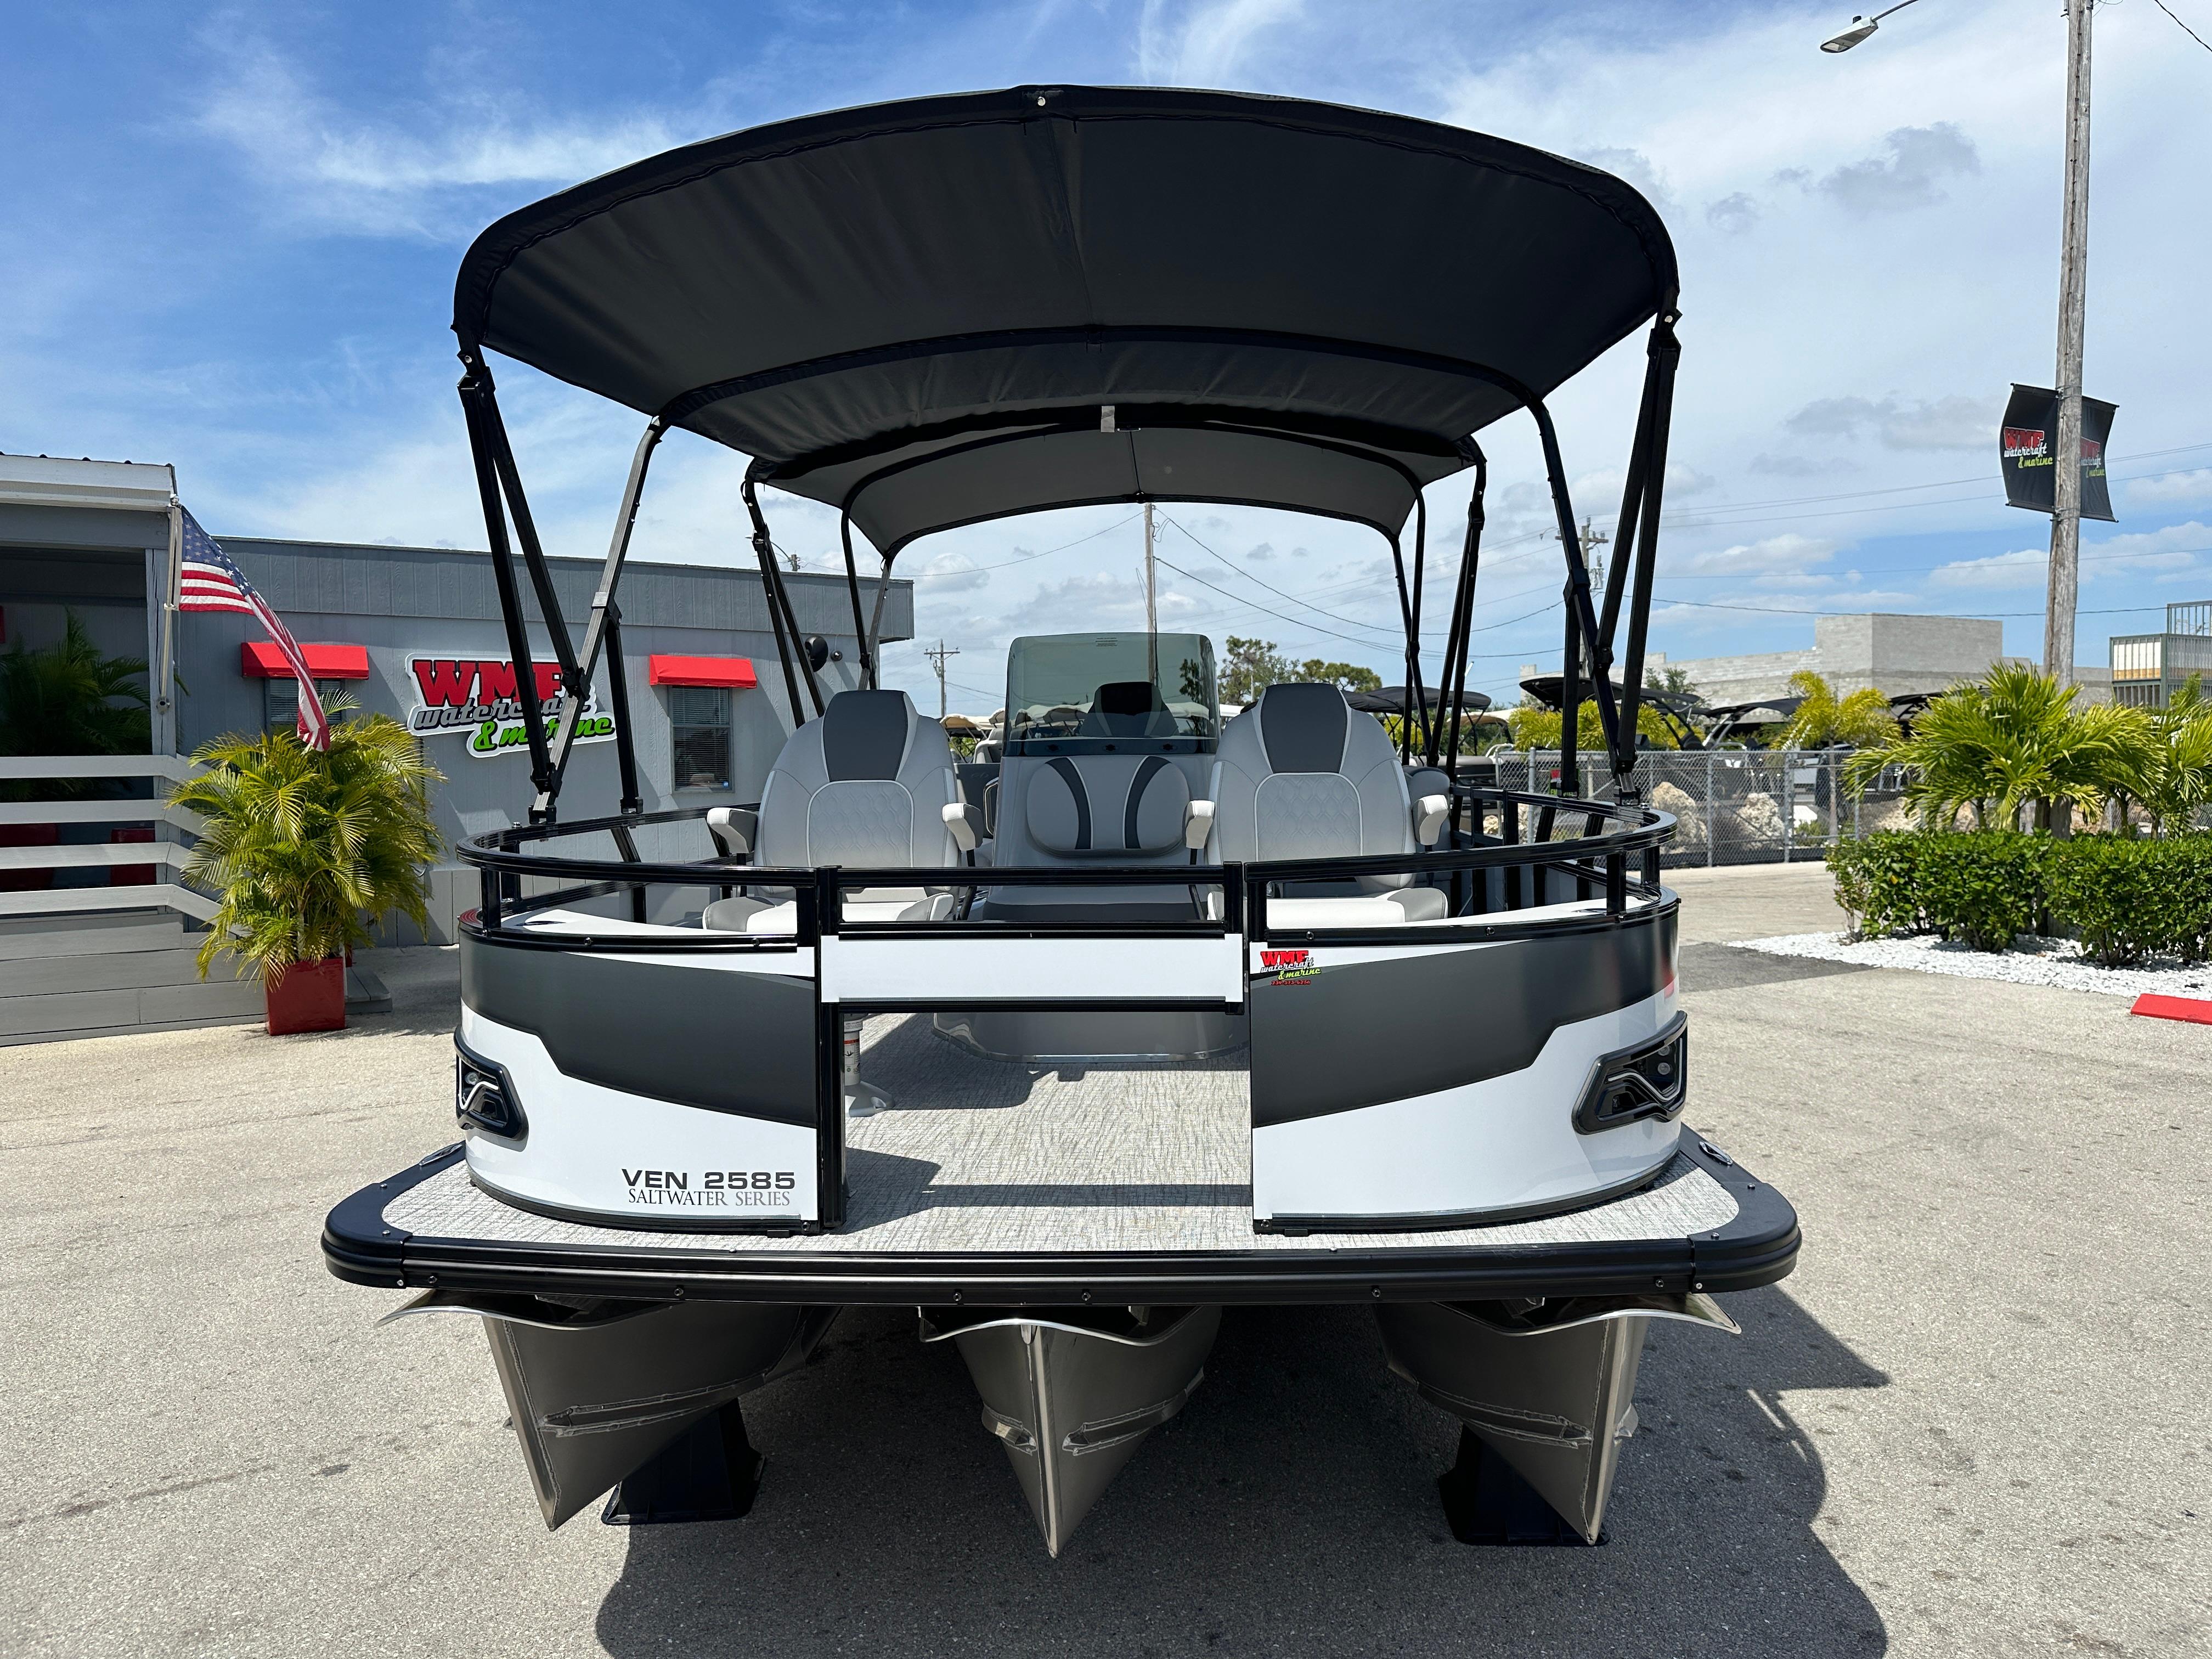 New 2024 Avalon 2785 Excalibur, Quad Lounger, Tri Toon, High Performance,  Mercury 400hp V-10, 33991 Cape Coral - Boat Trader